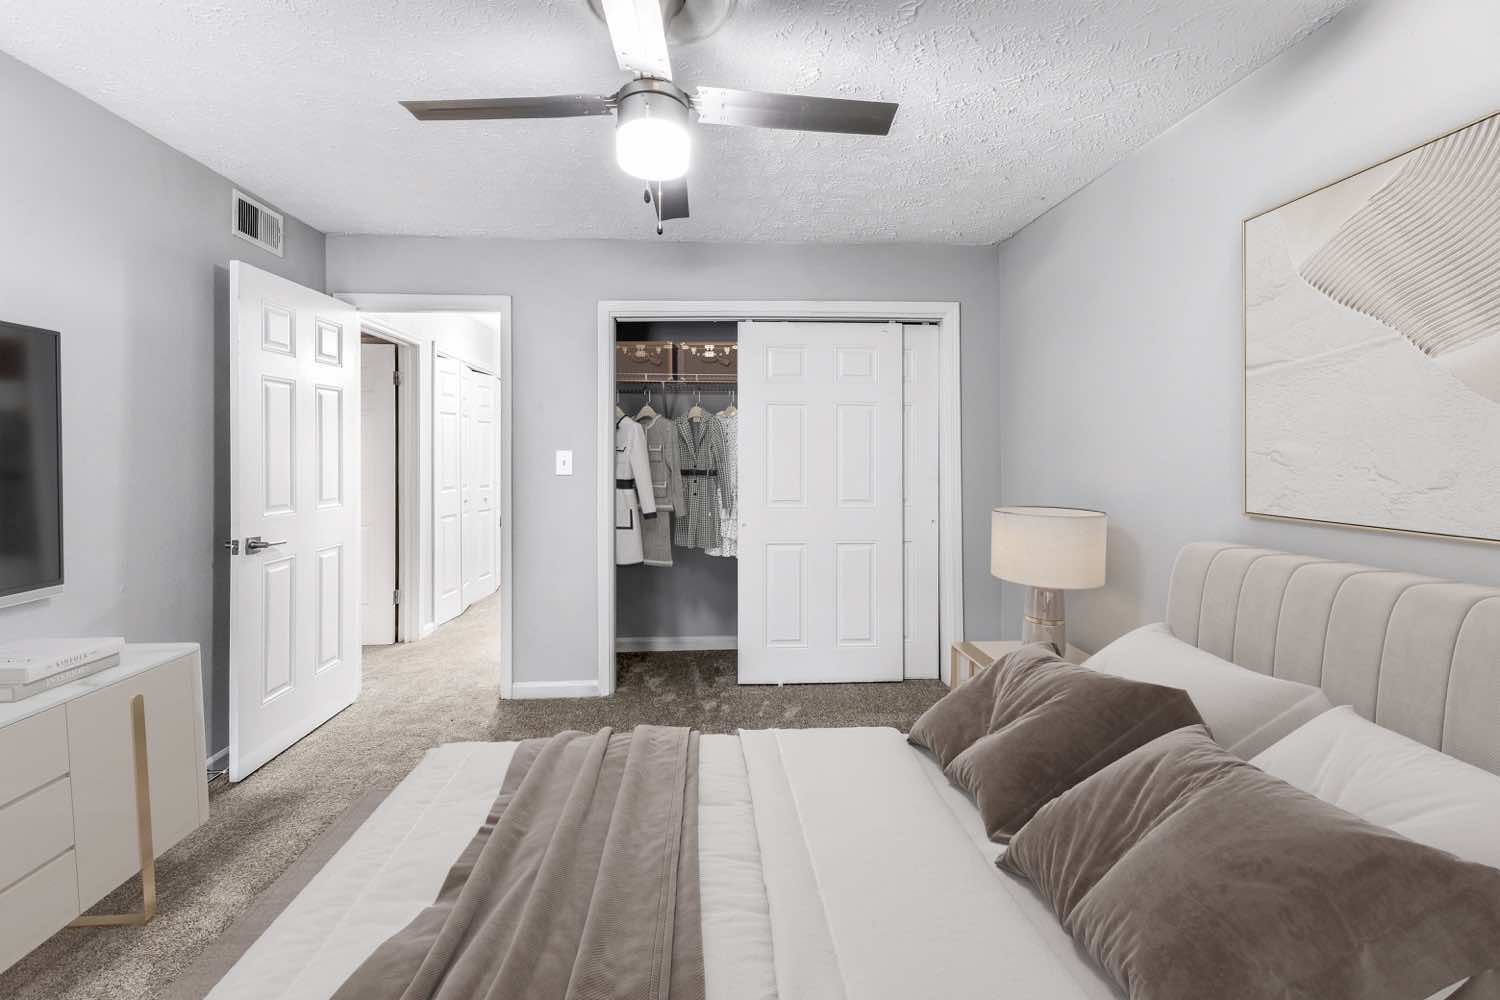 model bedroom with plush carpeting and ceiling fan